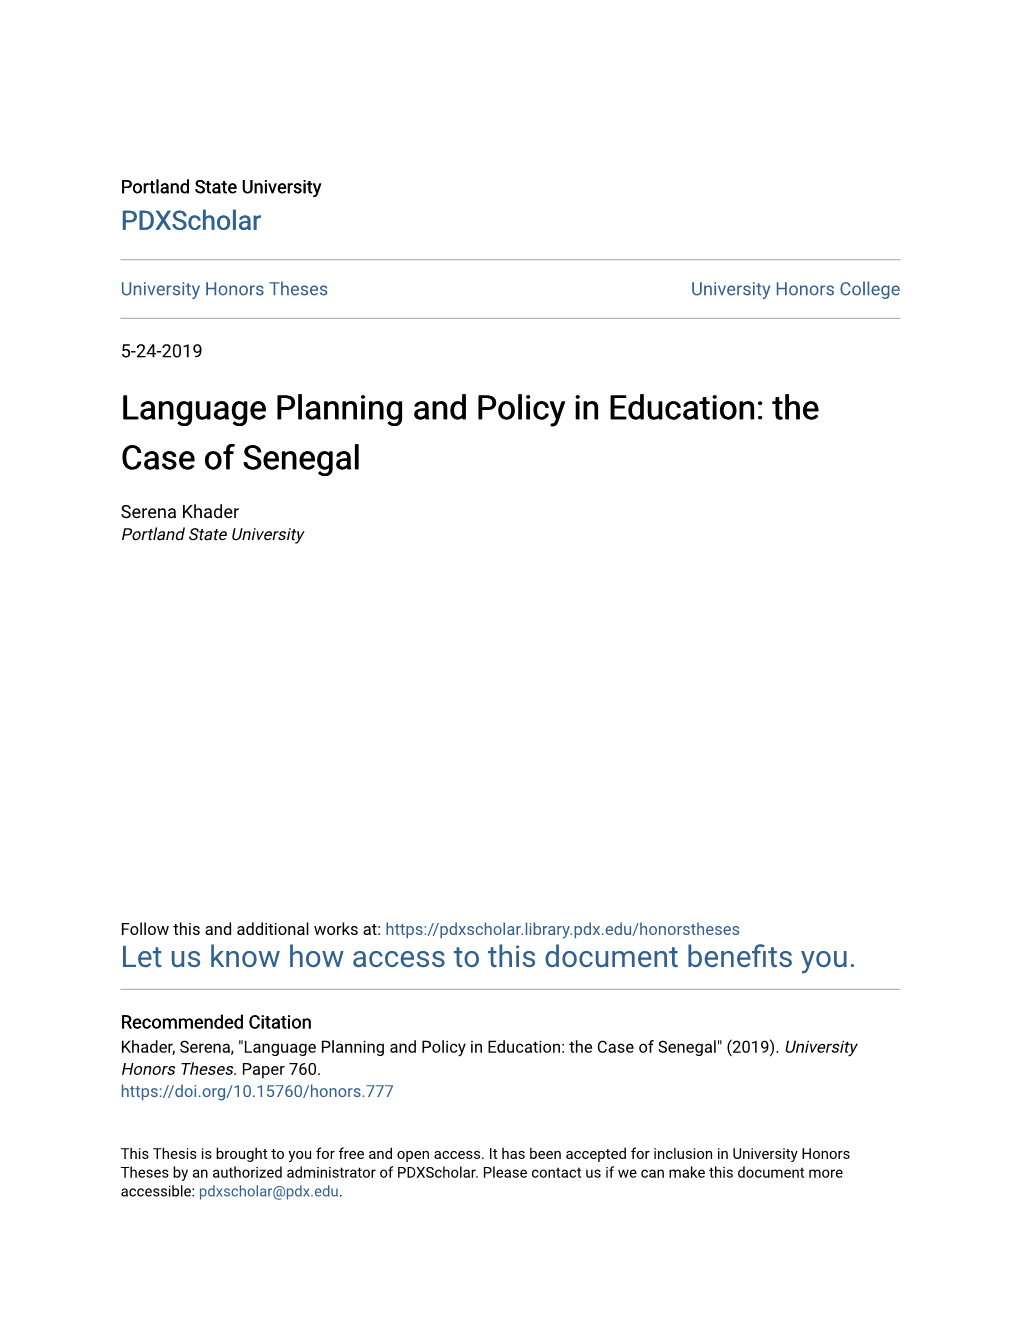 Language Planning and Policy in Education: the Case of Senegal